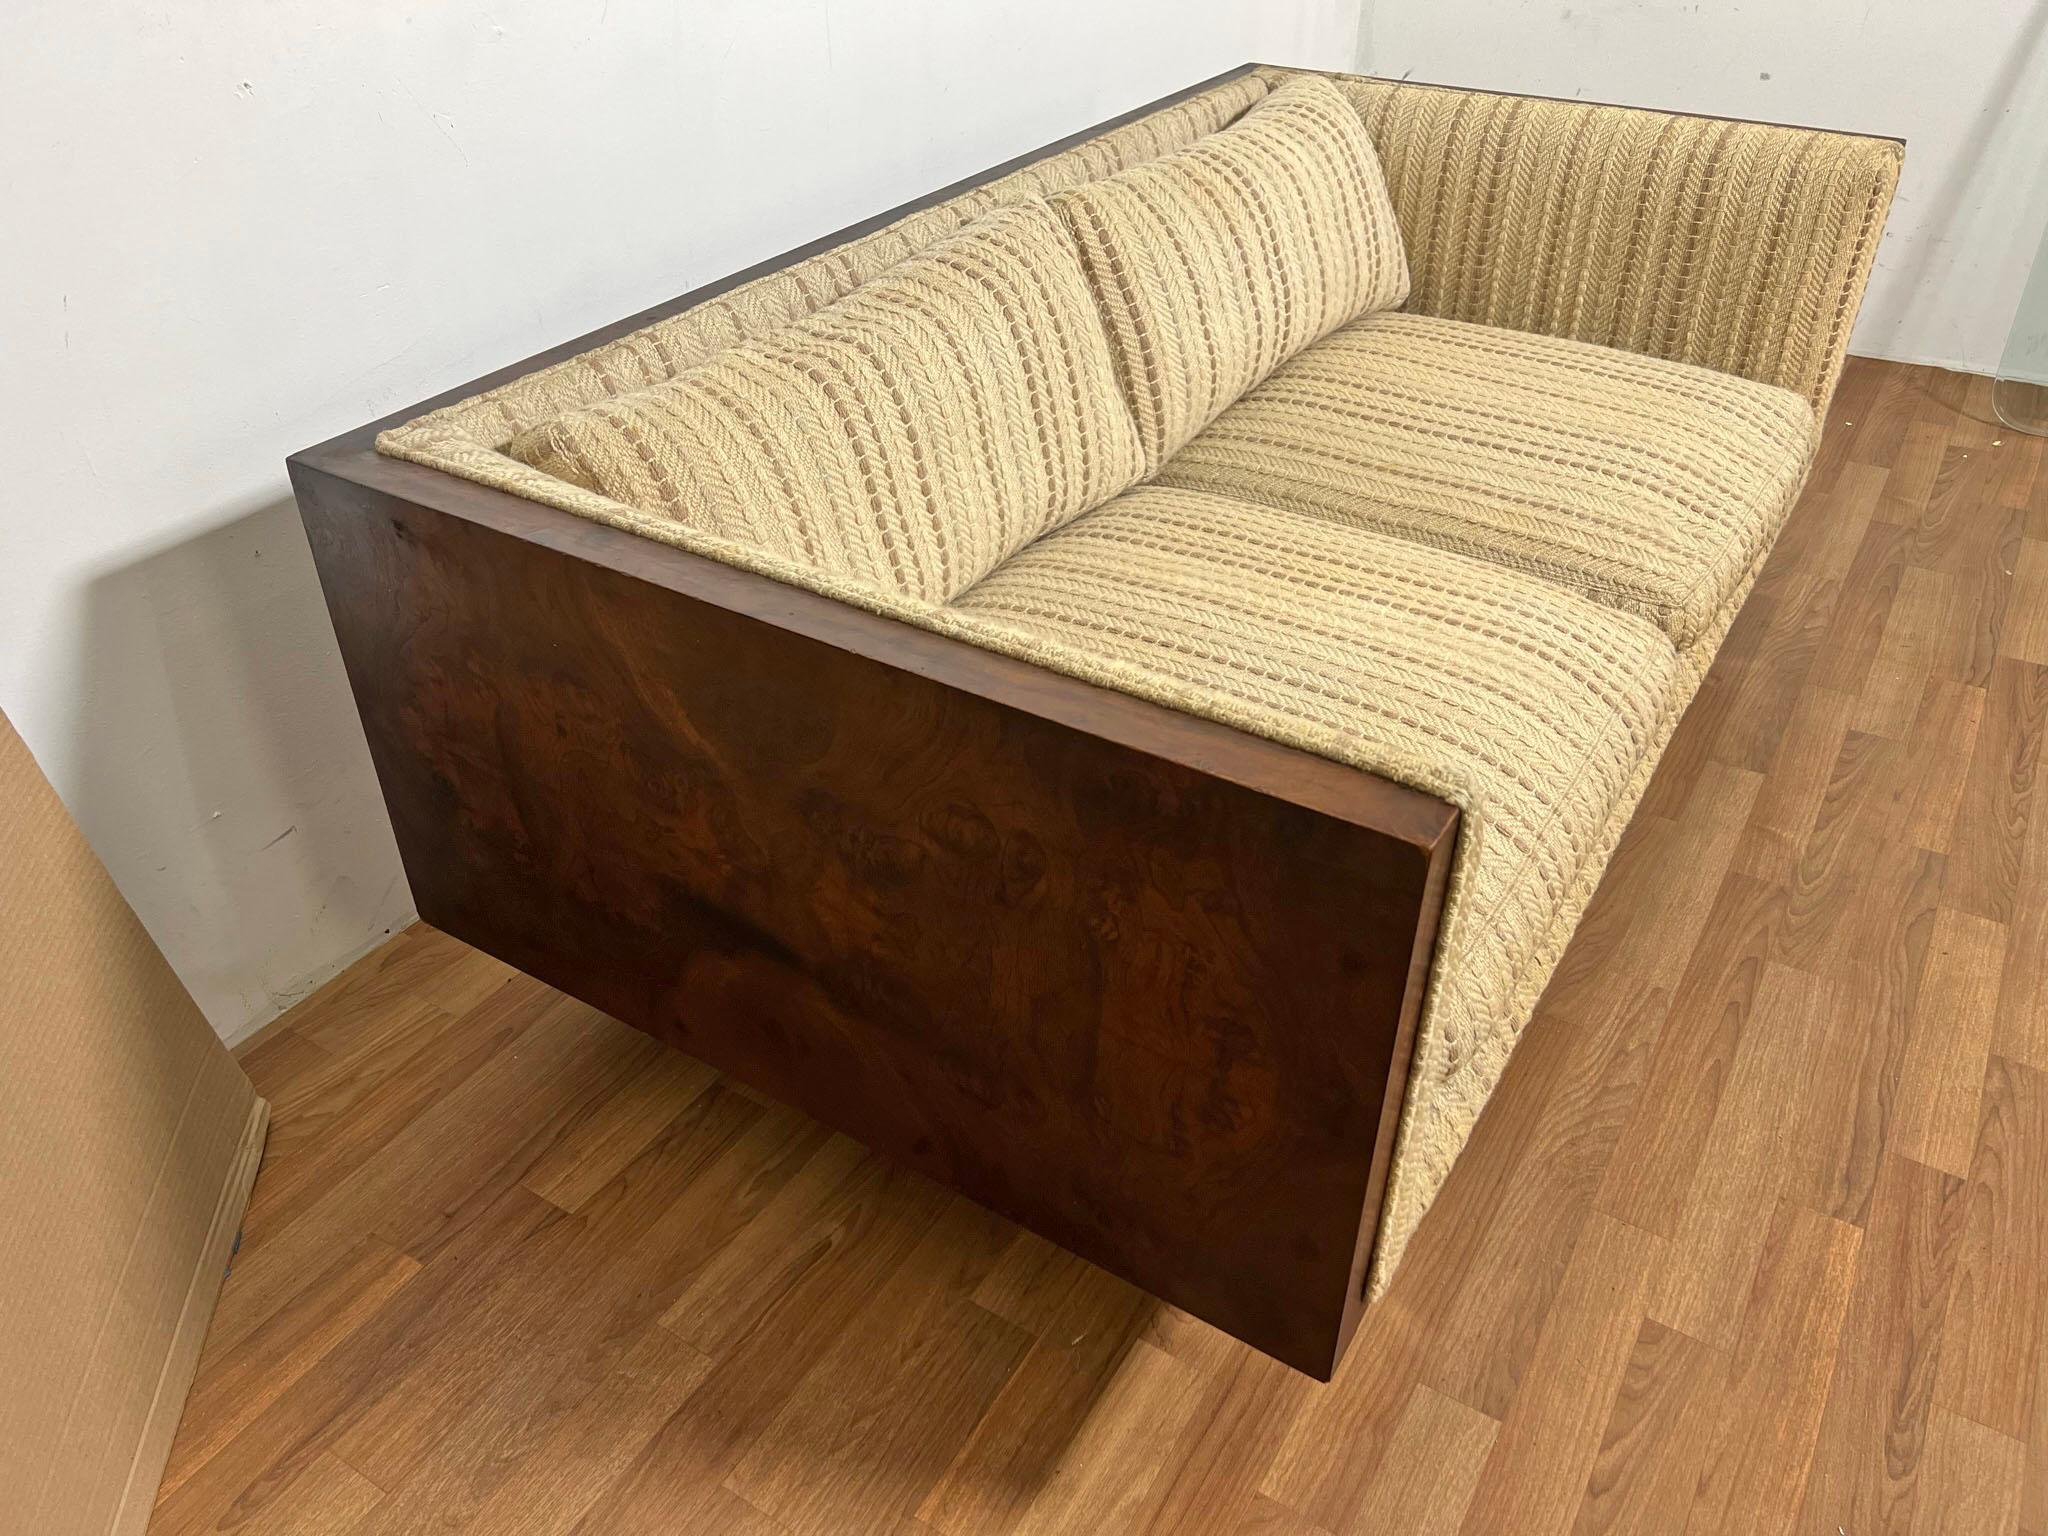 Loveseat by Milo Baughman for Thayer Coggin, featuring a burlwood case and chrome base, circa 1960s.